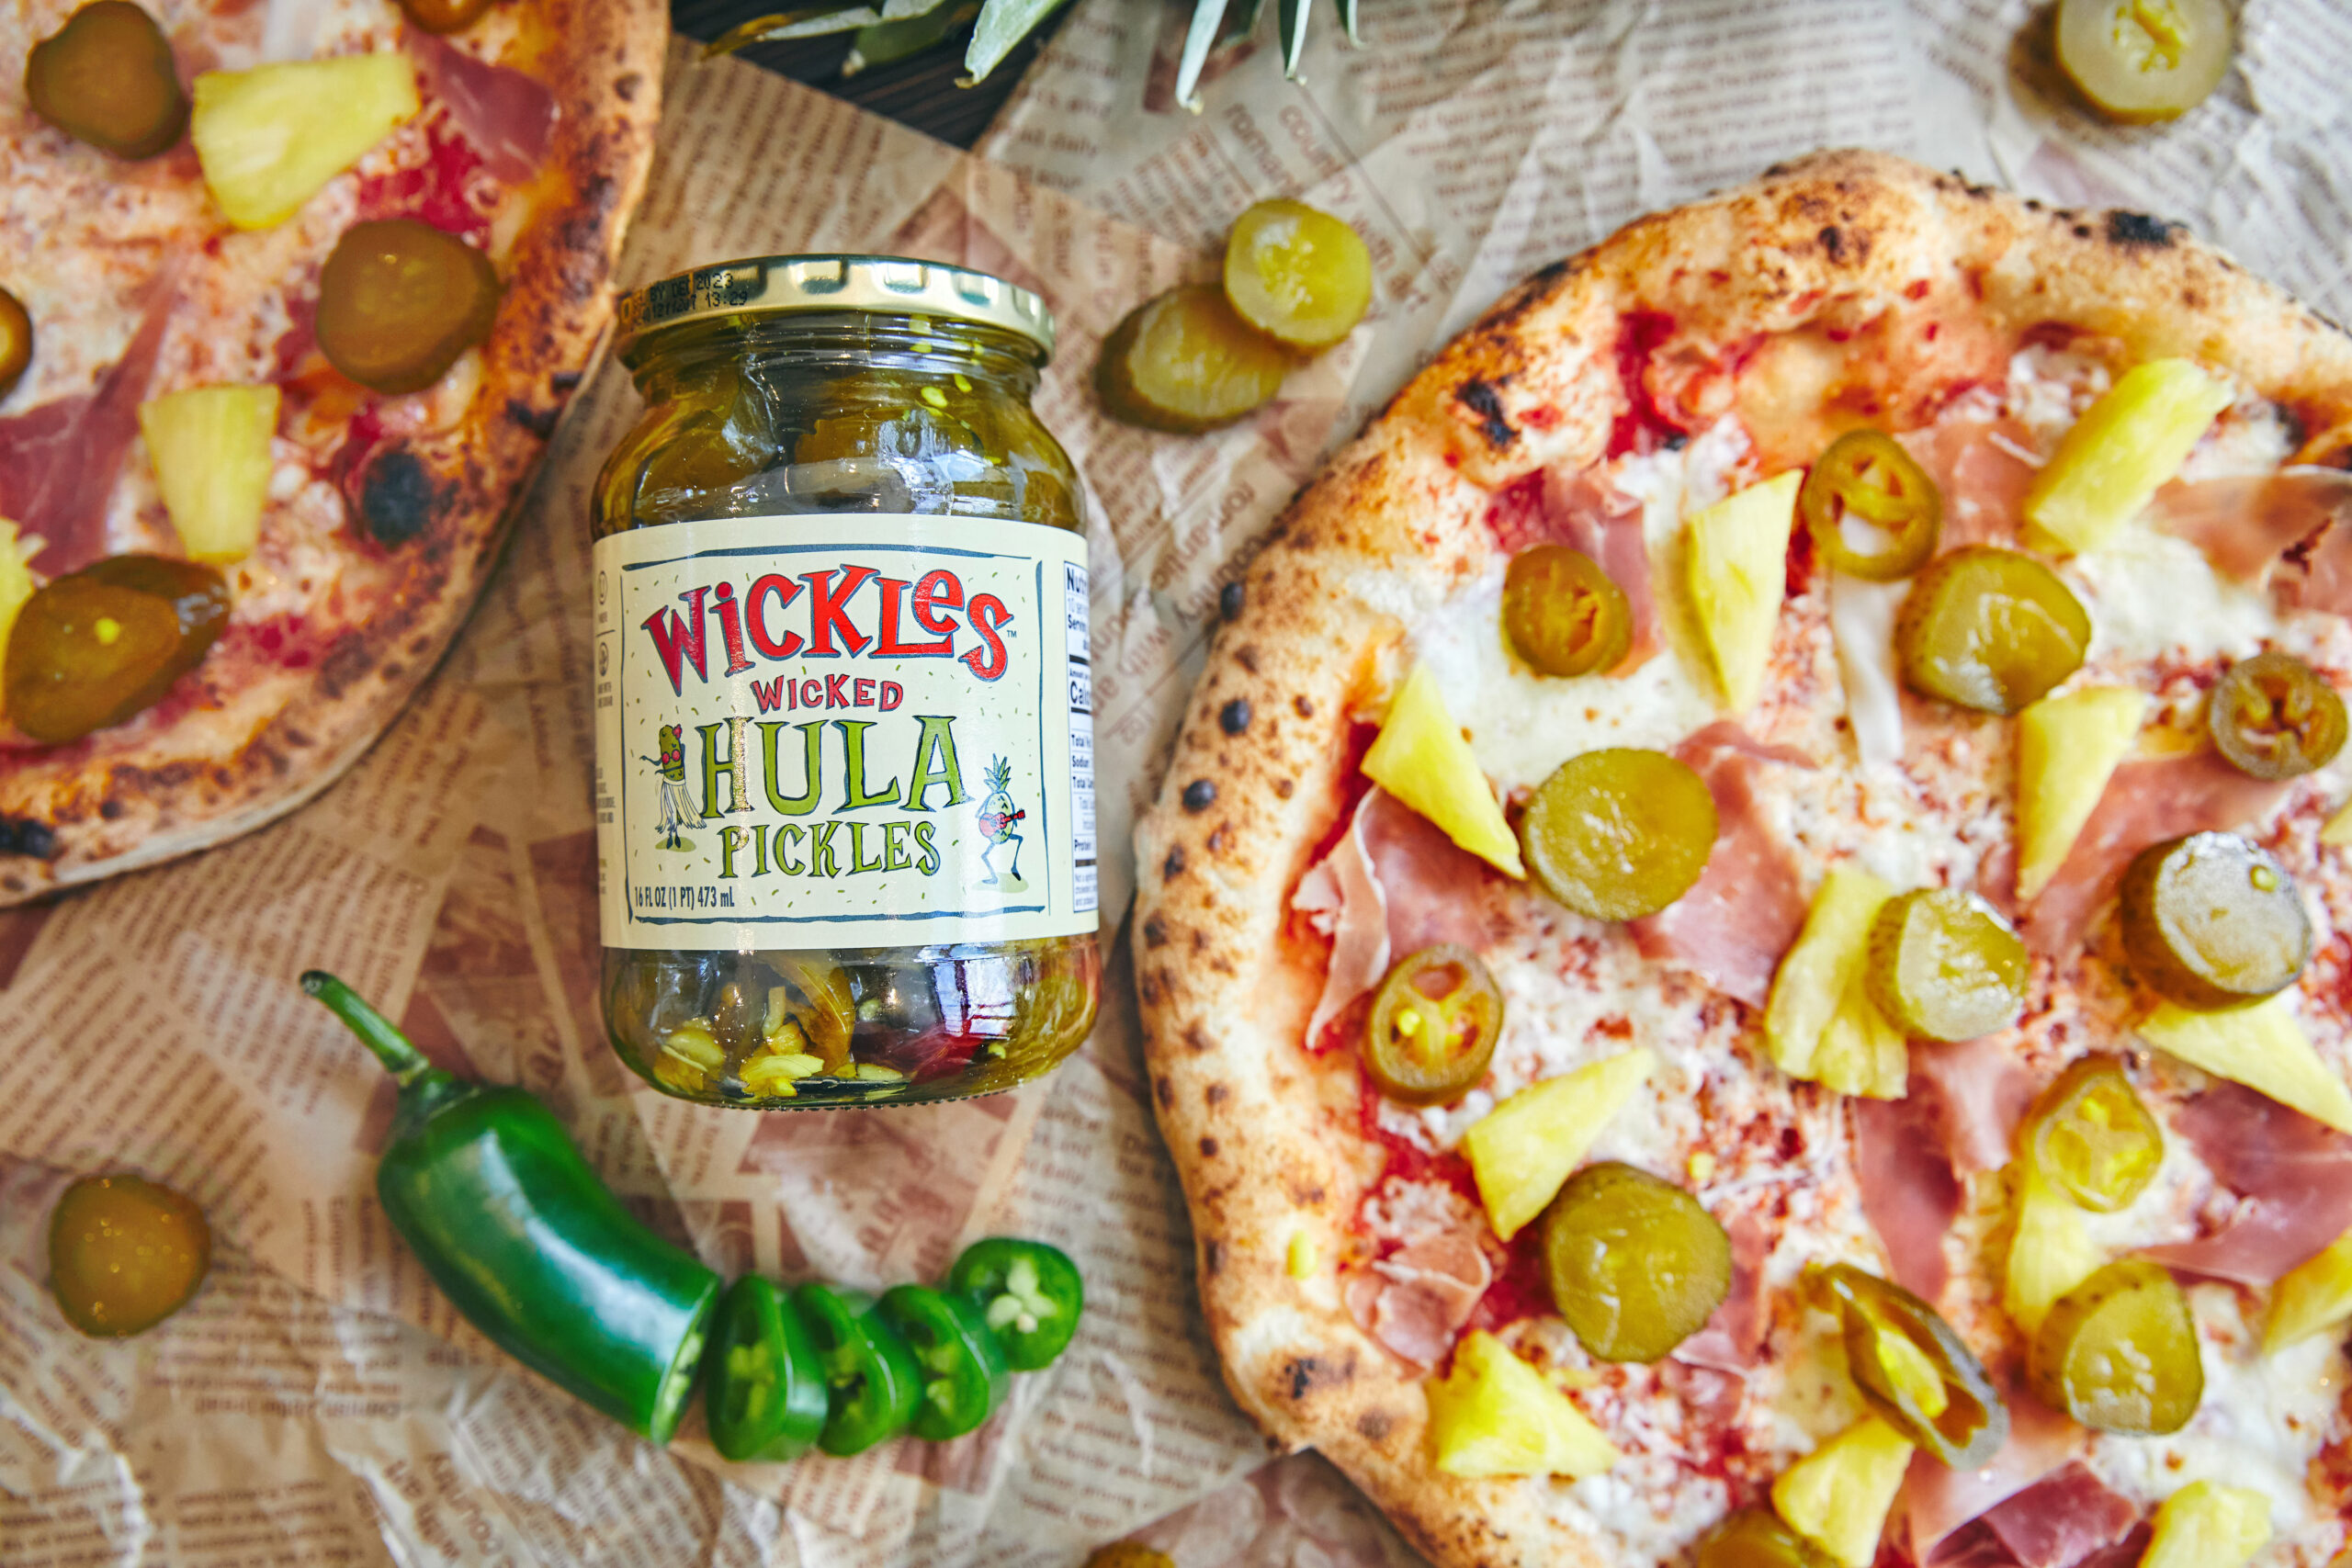 Wickles Hula Pizza with sliced jalapeno and jar of Wickles Hula Pickles beside it